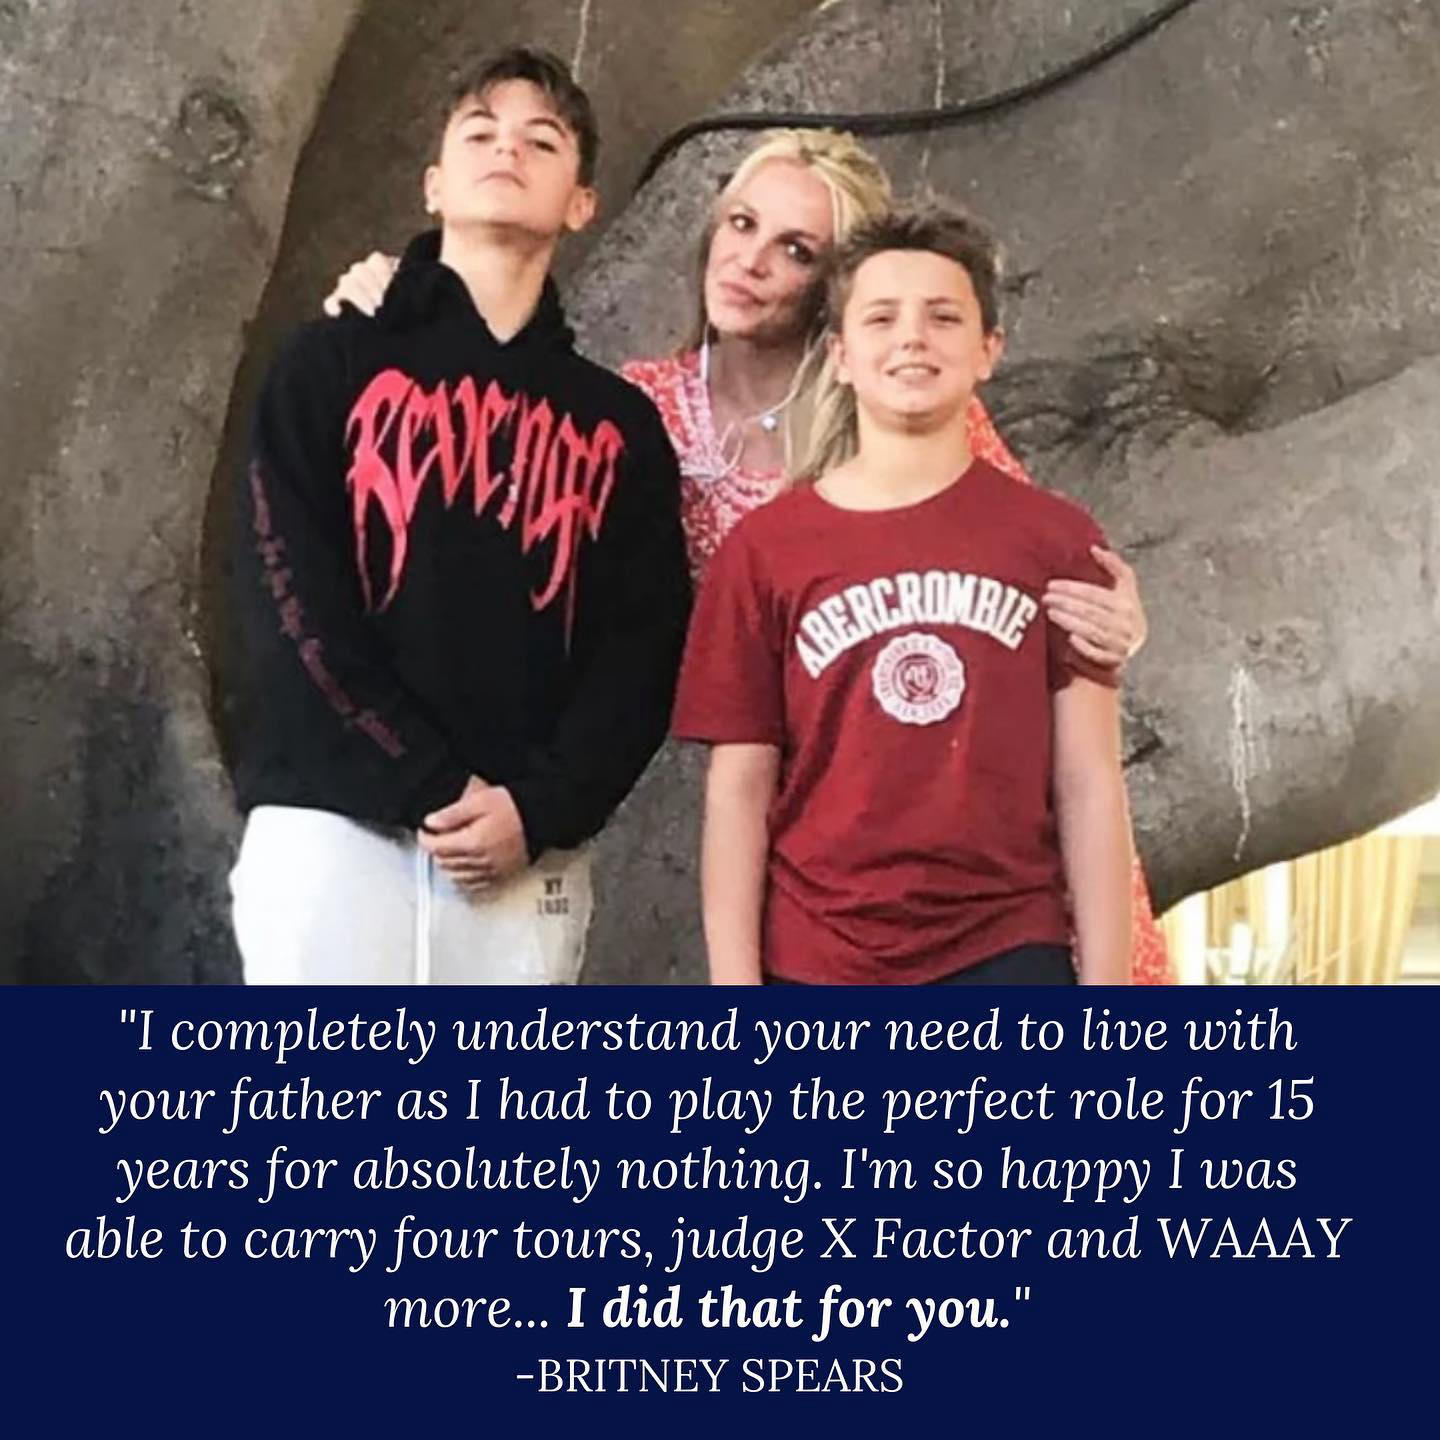 ExtraTV - Britney Spears has returned to Instagram to share a very personal message to her sons, aft